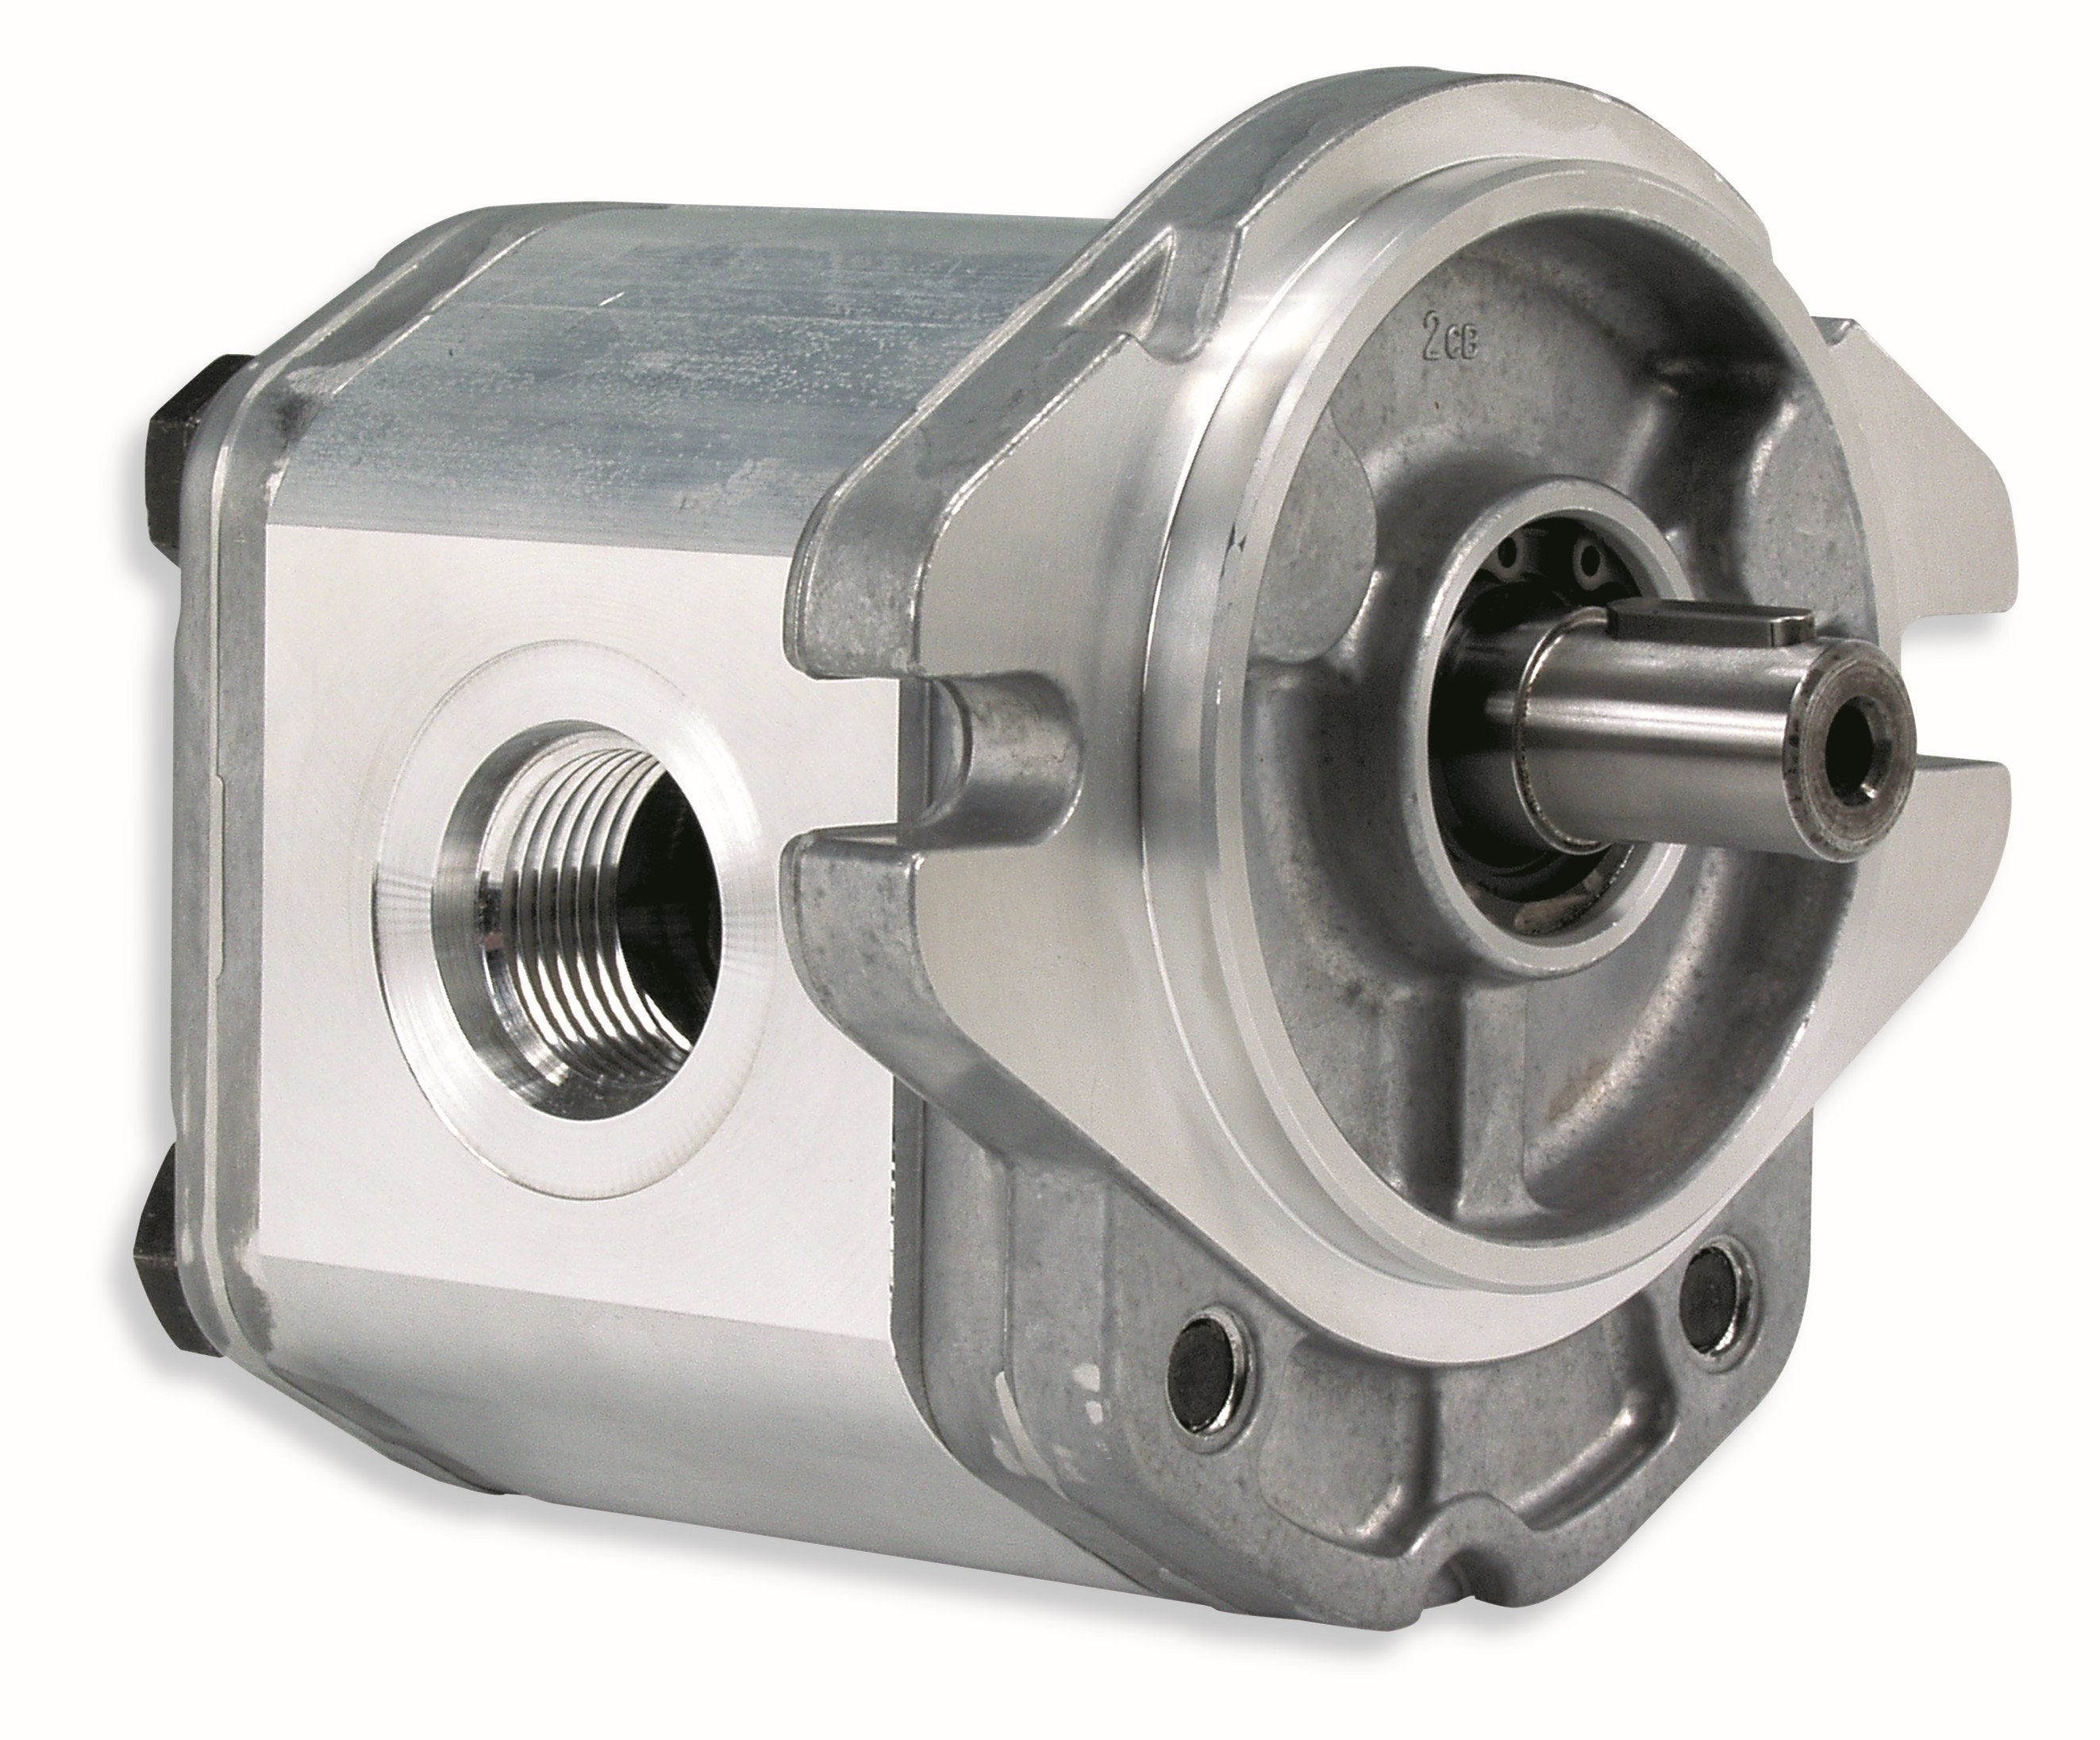 GHM2A-R-6-E2 : Marzocchi Gear Motor, Bidirectional, 4.5cc, 4060psi rated, 4000RPM, 0.75 (3/4") #12 SAE ports, 5/8" Bore x 5/32" Keyed Shaft